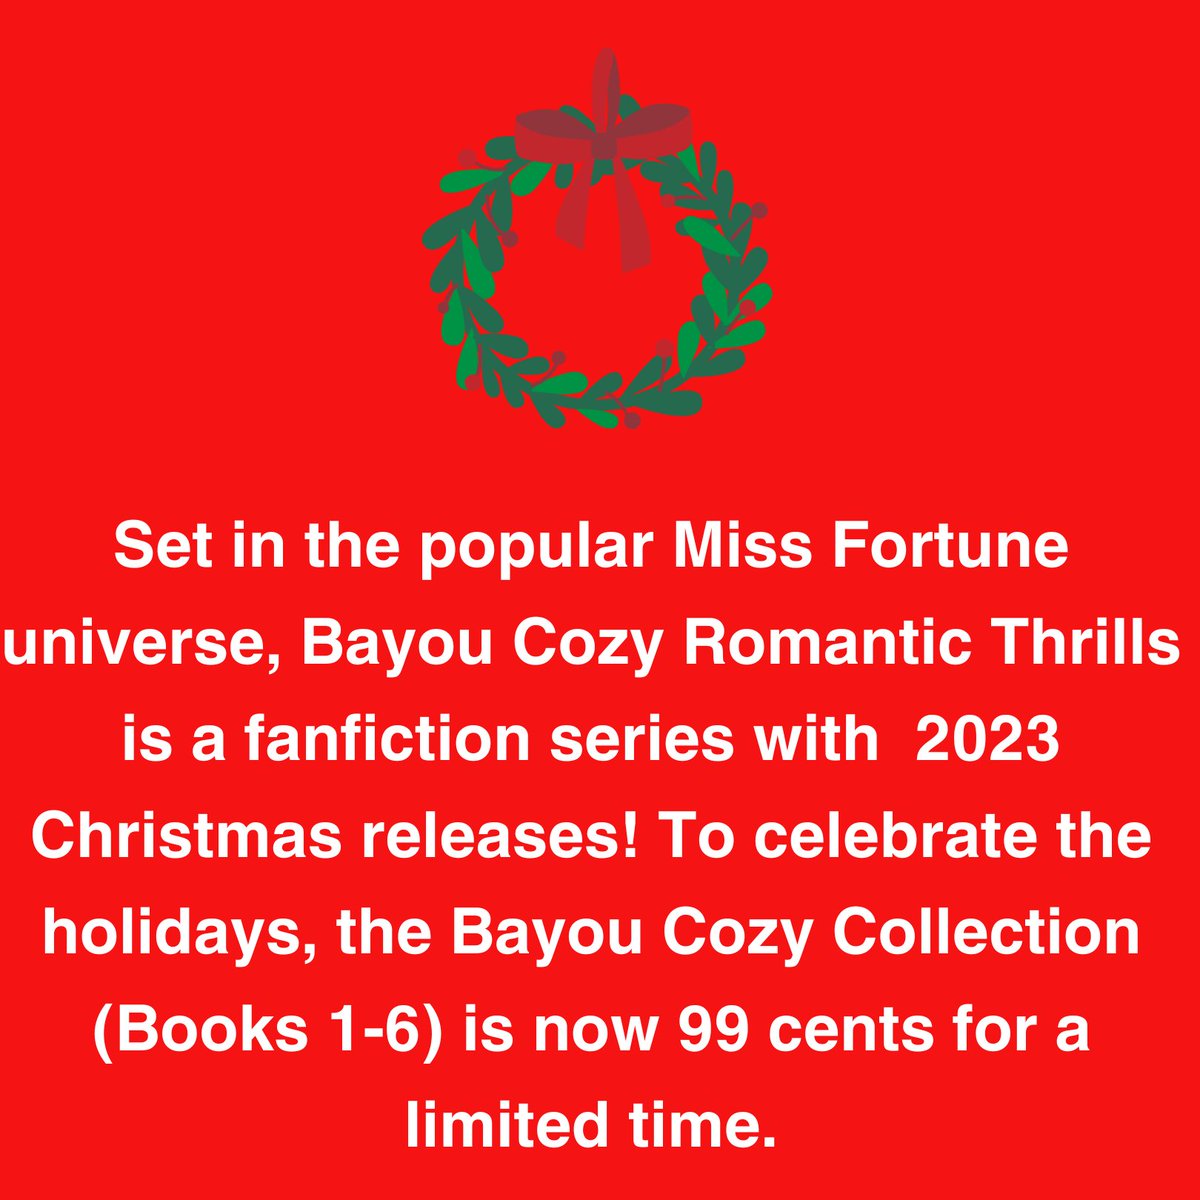 #WhatToRead #booktwt  #booktok  #cozy #mystery #suspense #NewReleases #99cents #cozymysteries #suspense #thrillers #mystery #SouthernFiction  #adventure #womensgifts #Holidayreads #holidayreading #Christmasreads #books

What are you #reading? 

amazon.com/author/rileybl…